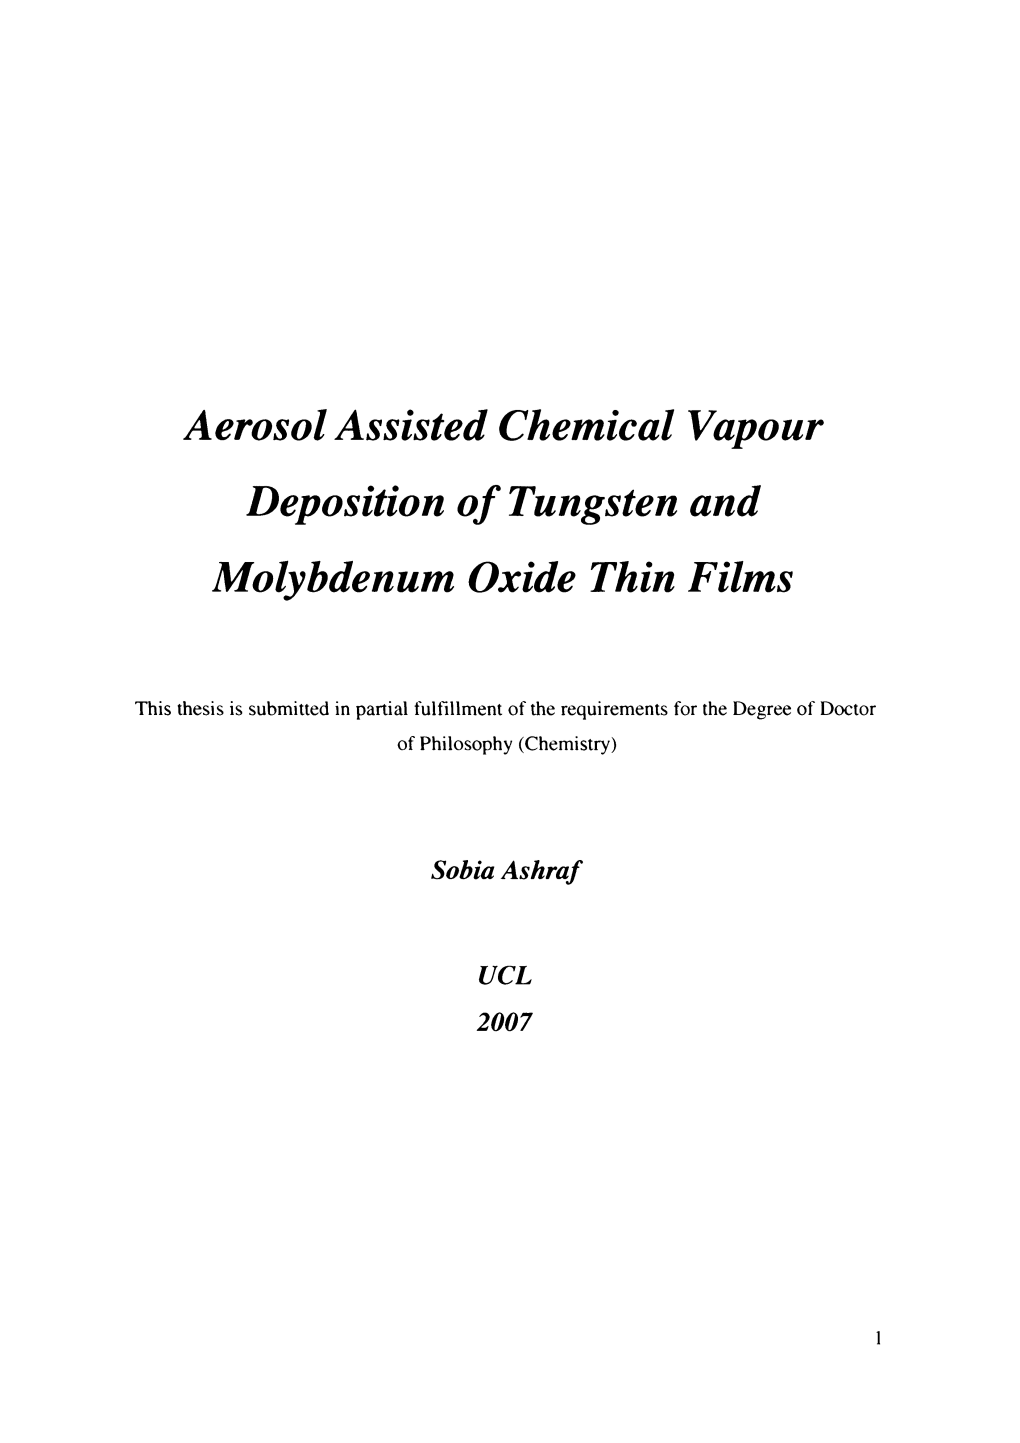 Aerosol Assisted Chemical Vapour Deposition of Tungsten and Molybdenum Oxide Thin Films